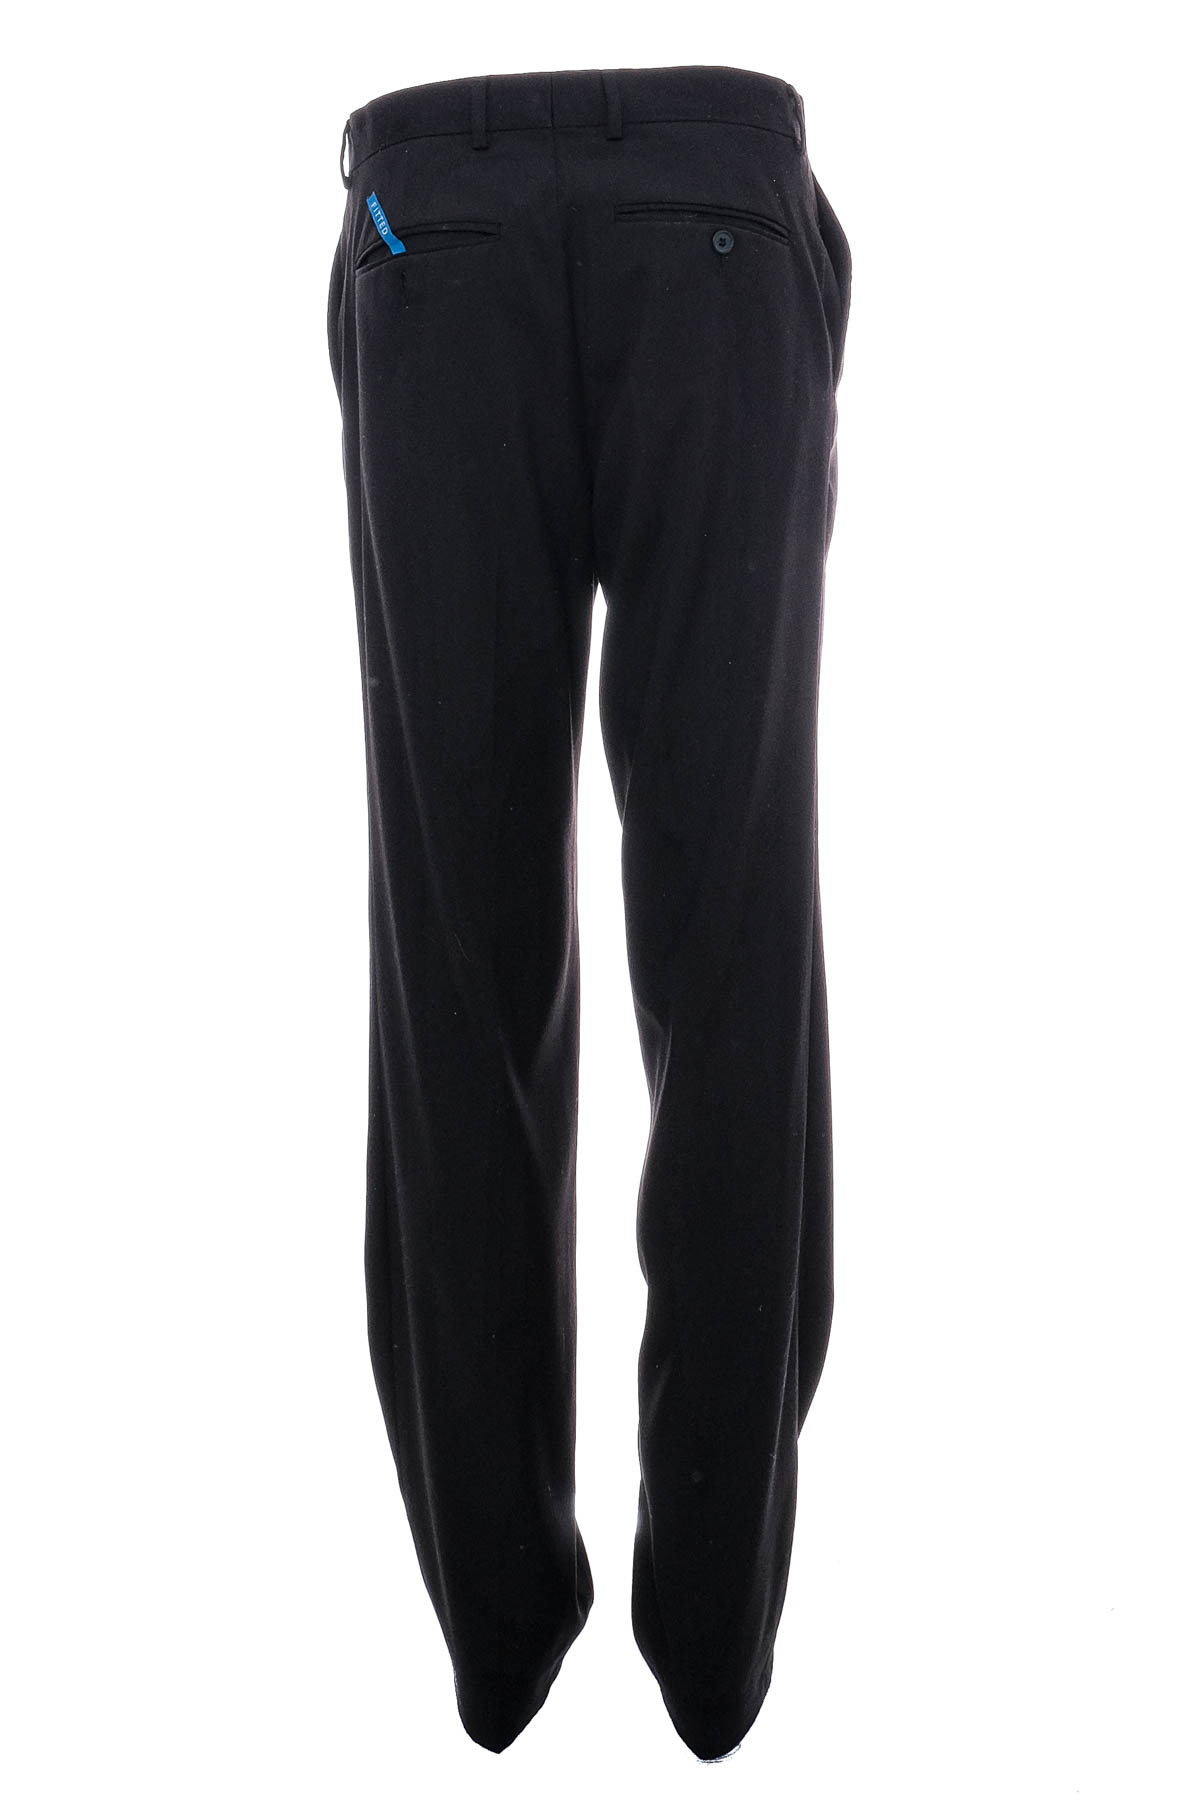 Men's trousers - Coolwater - 1